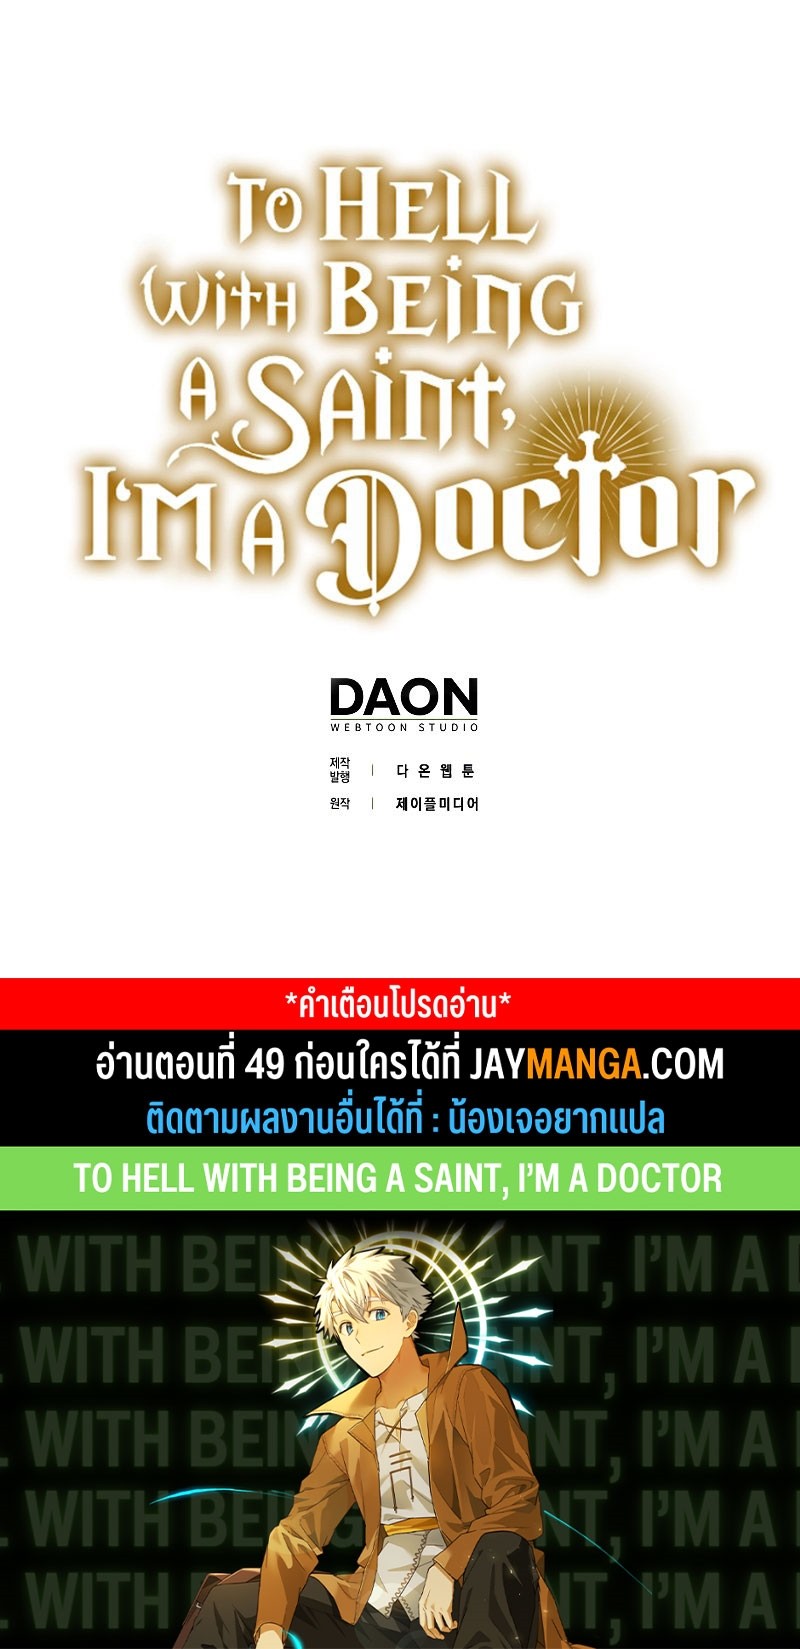 to hell with being a saint im a doctor 48.33